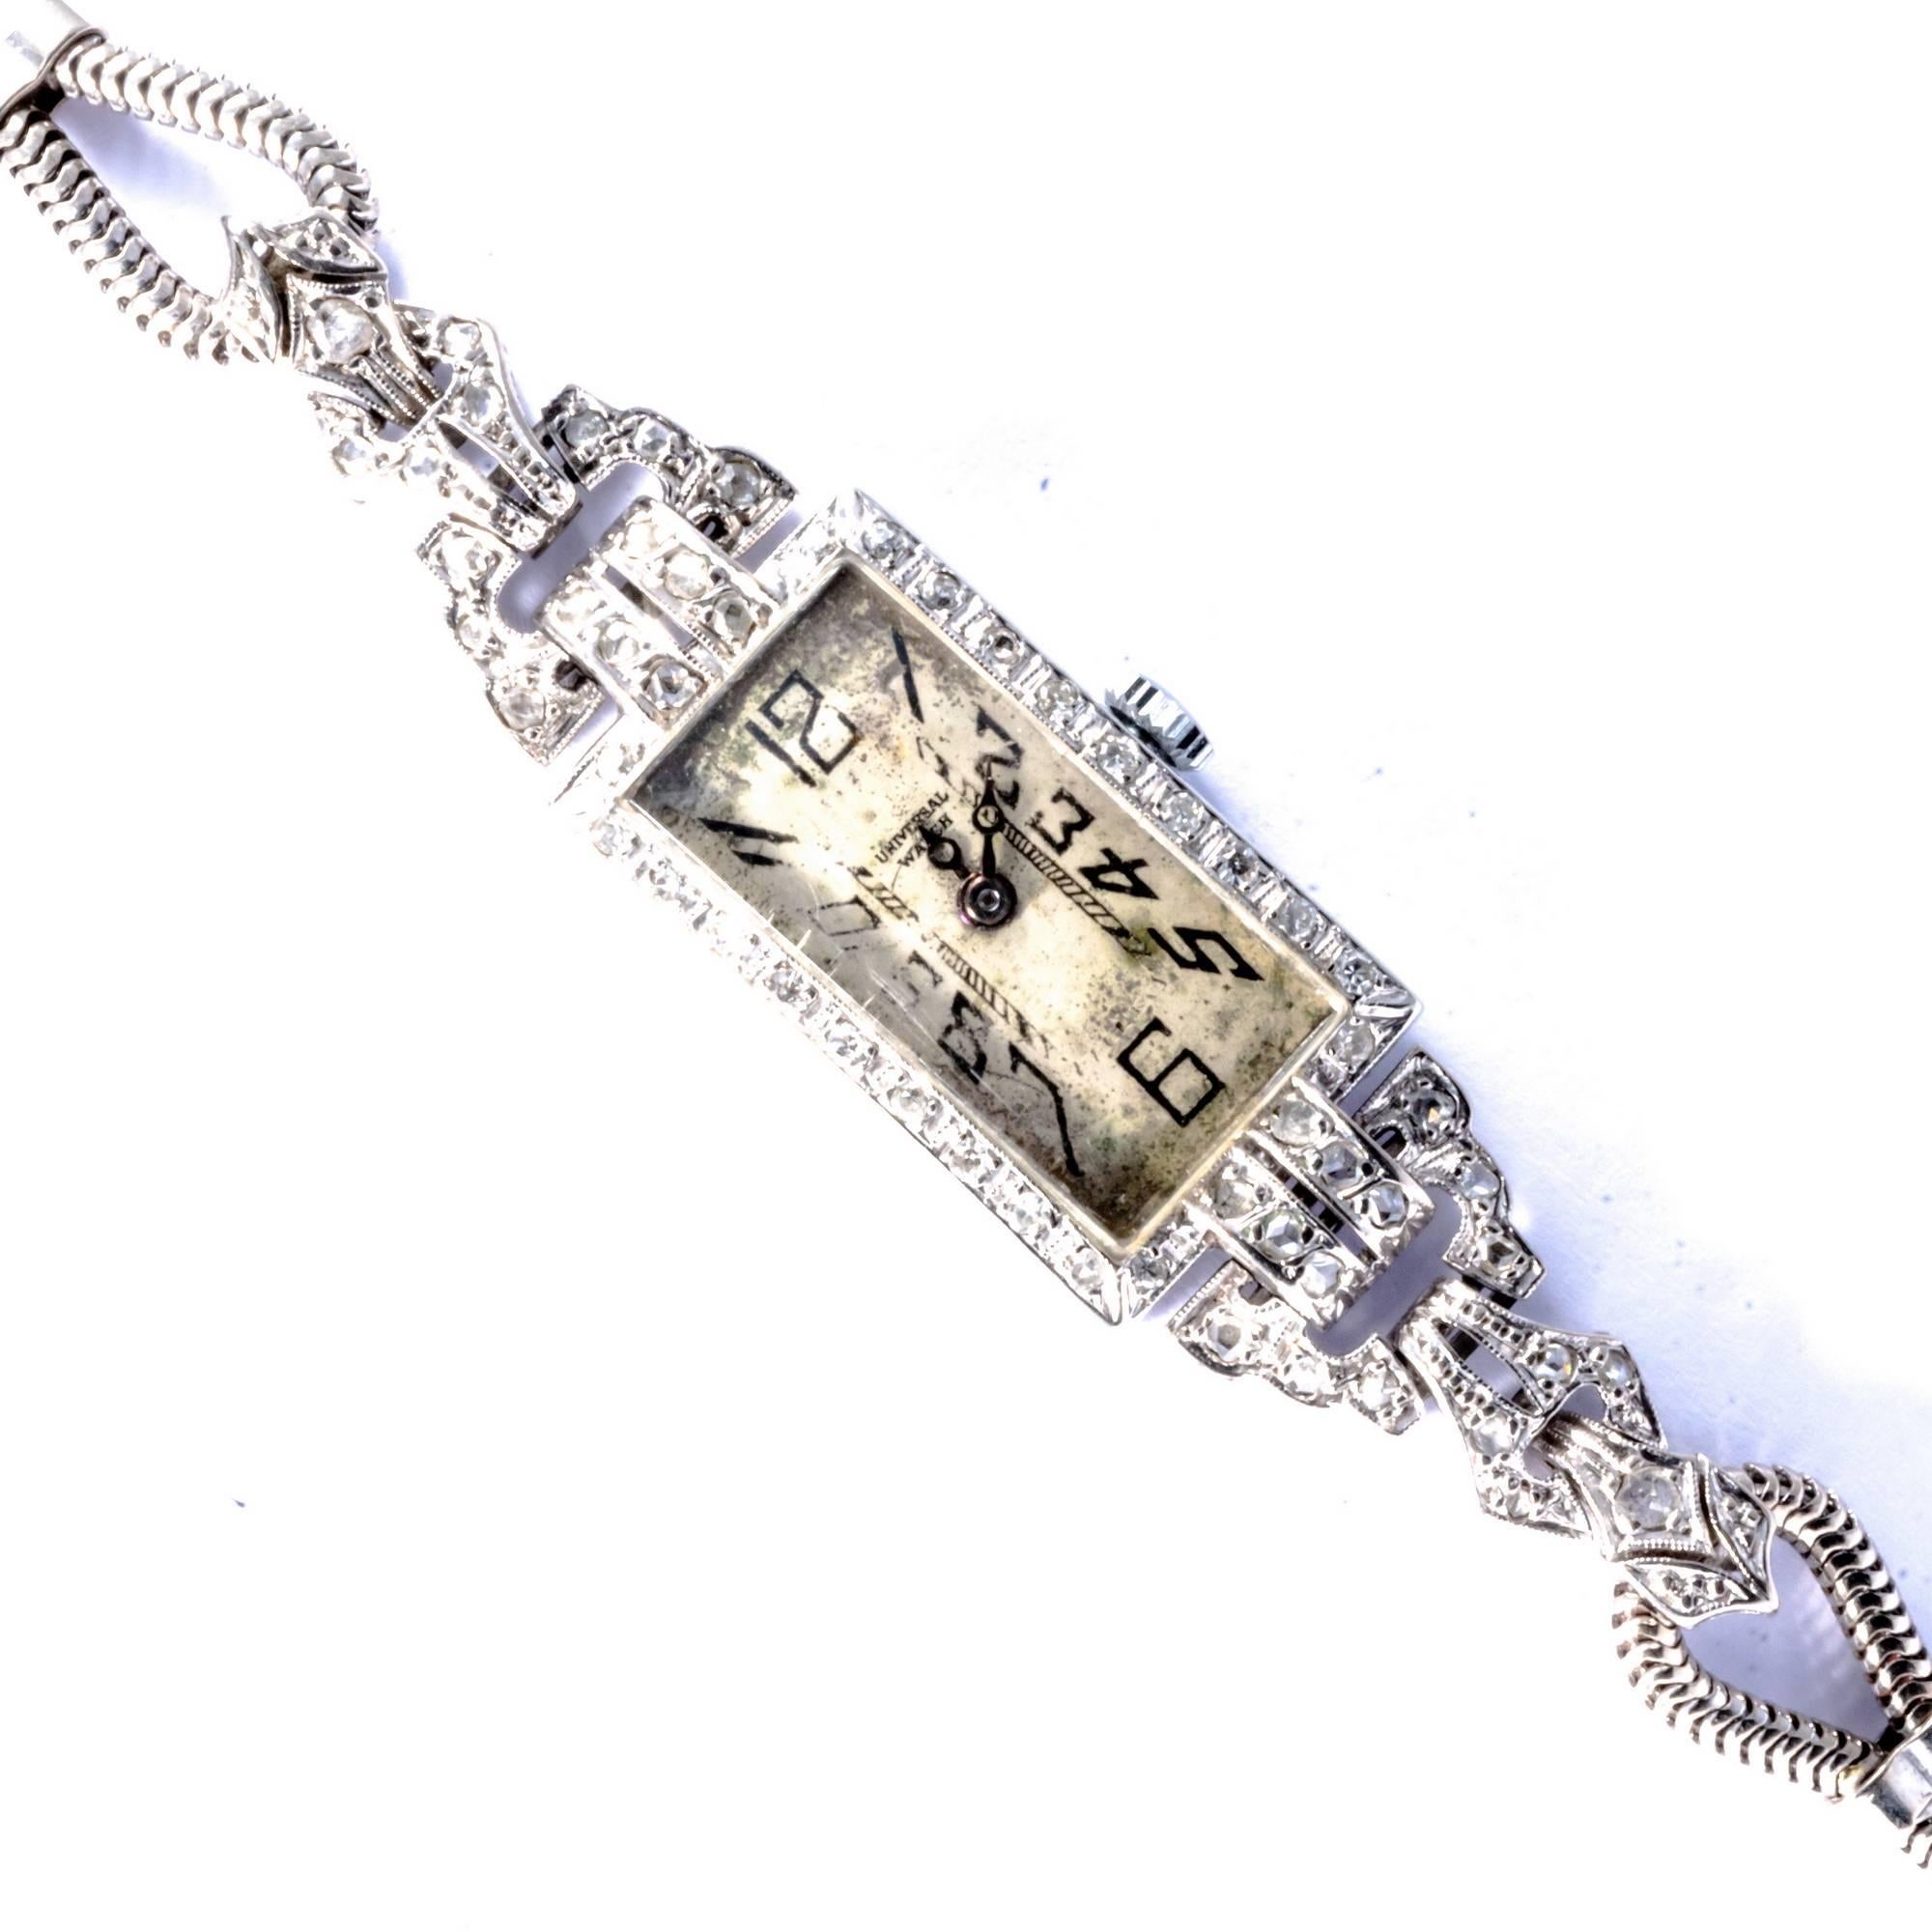 Elegant and ultra-flat ladies' wristwatch made in Switzerland before the manufacturer, the Universal Watch,  moved to Geneva in 1929. Original art déco, hand made in white gold 18 k, featuring filigree decorations with old mine and huit-huit cut